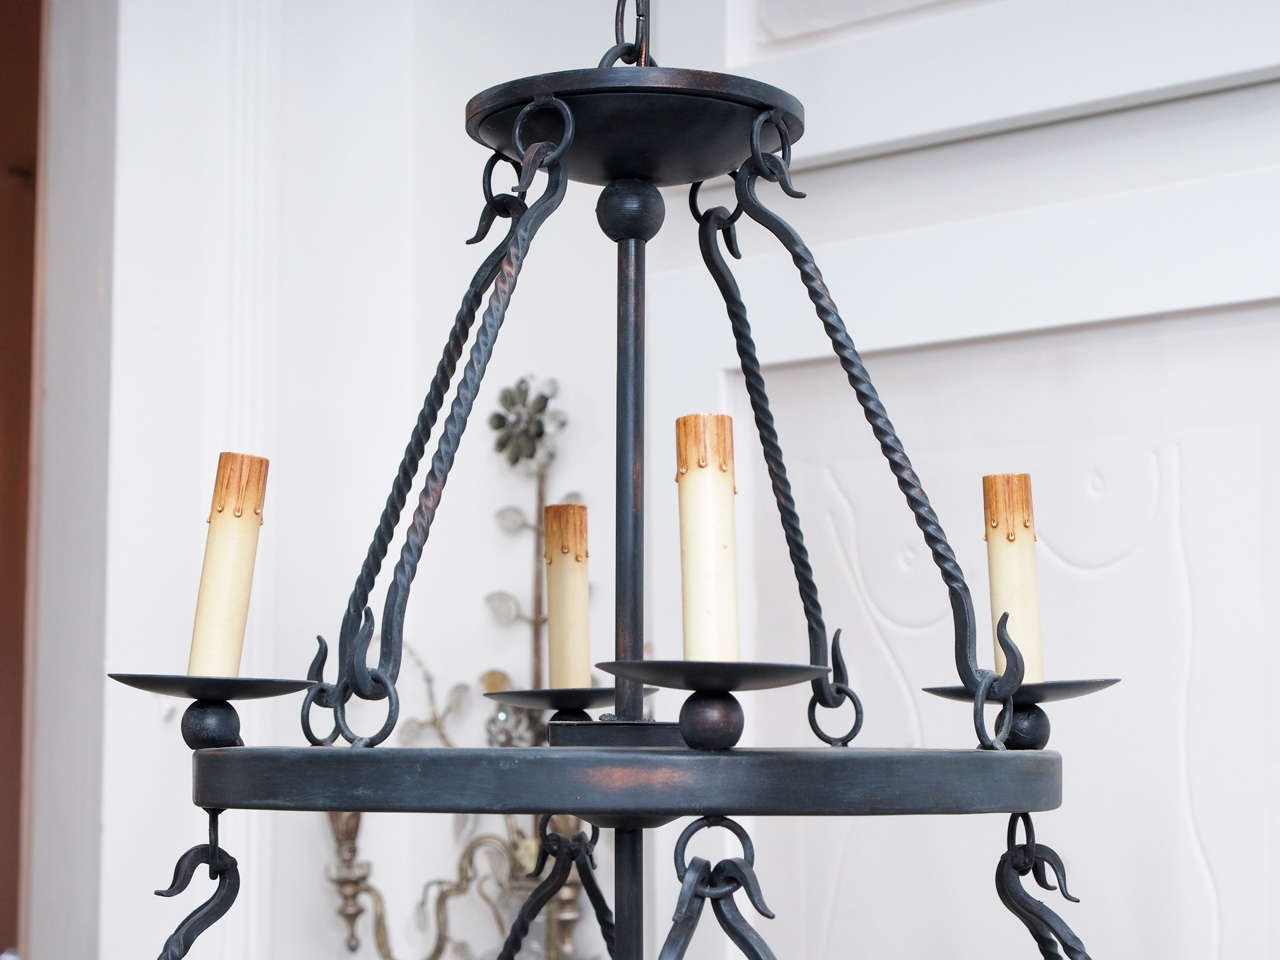 Other Pair of Black Wrought Iron Chandeliers